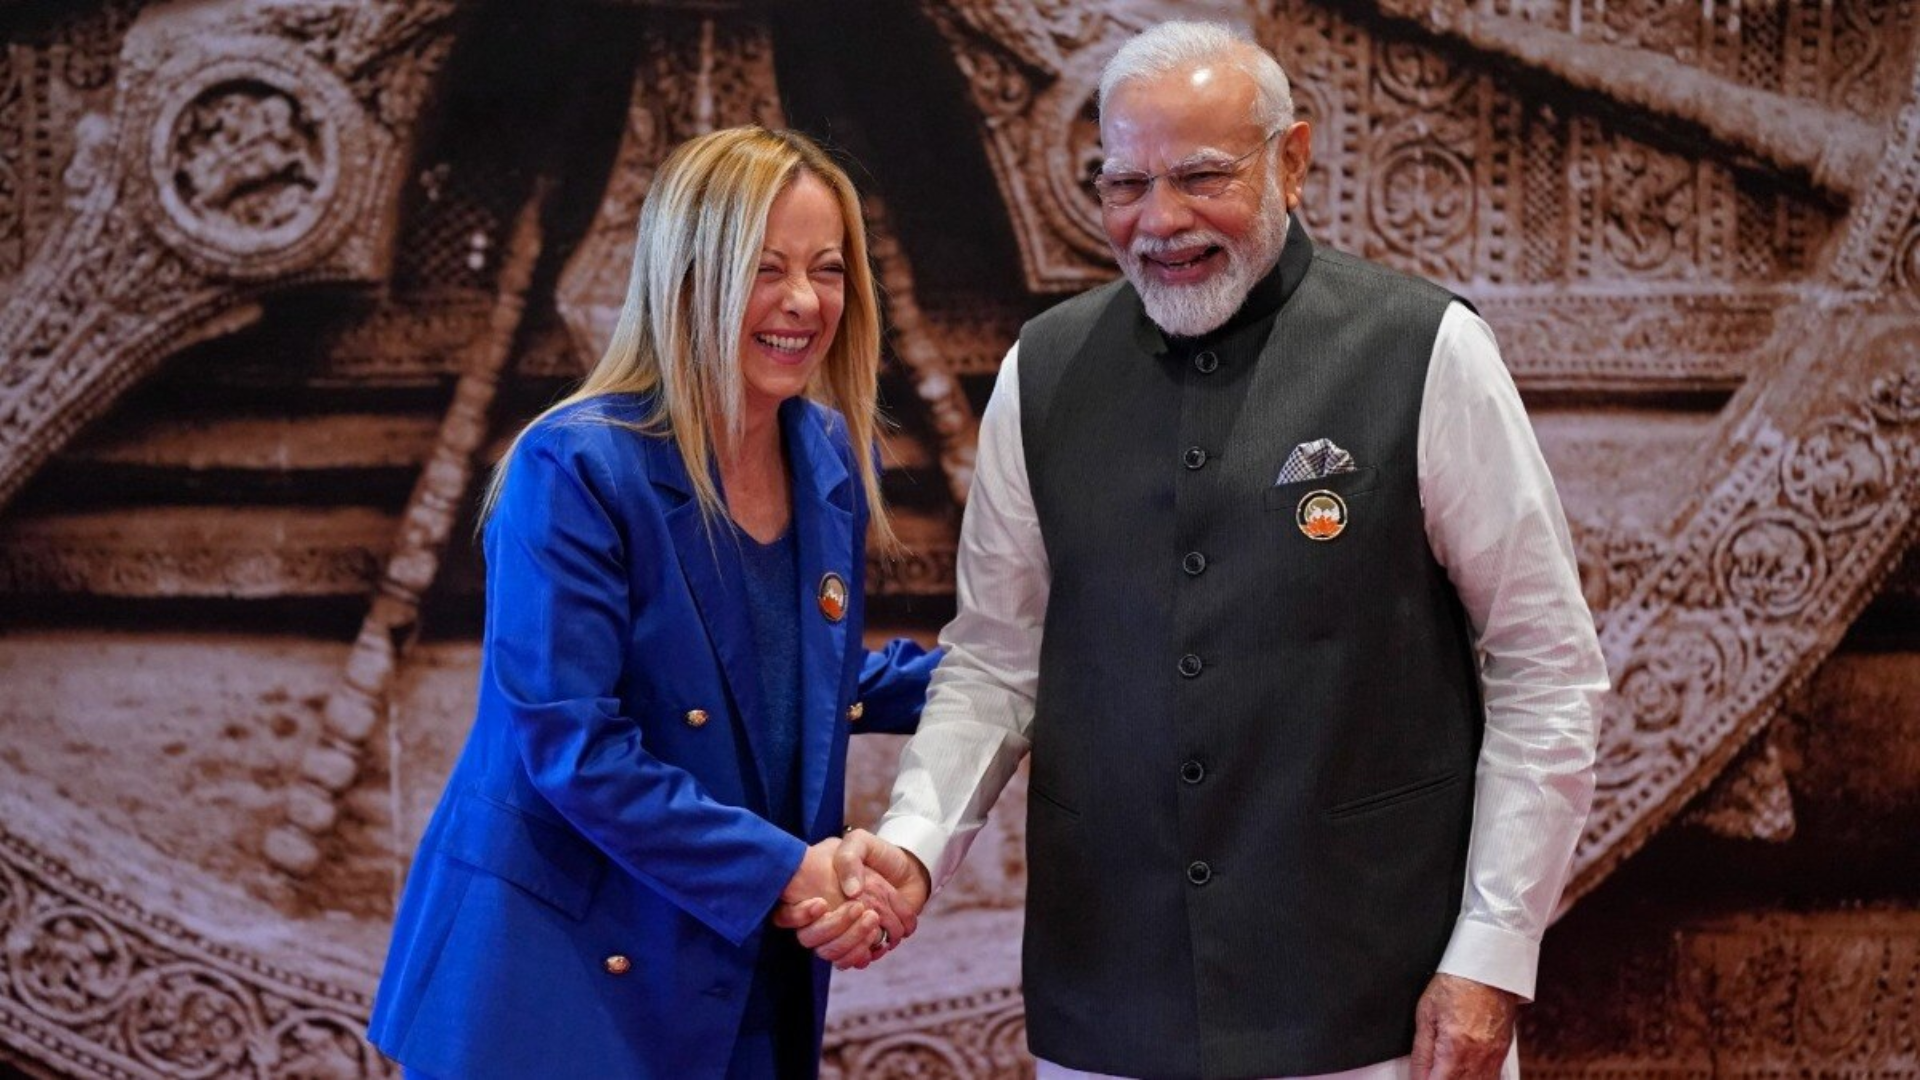 PM Modi and Italian PM Meloni discuss bilateral ties and G7 Summit in phone call